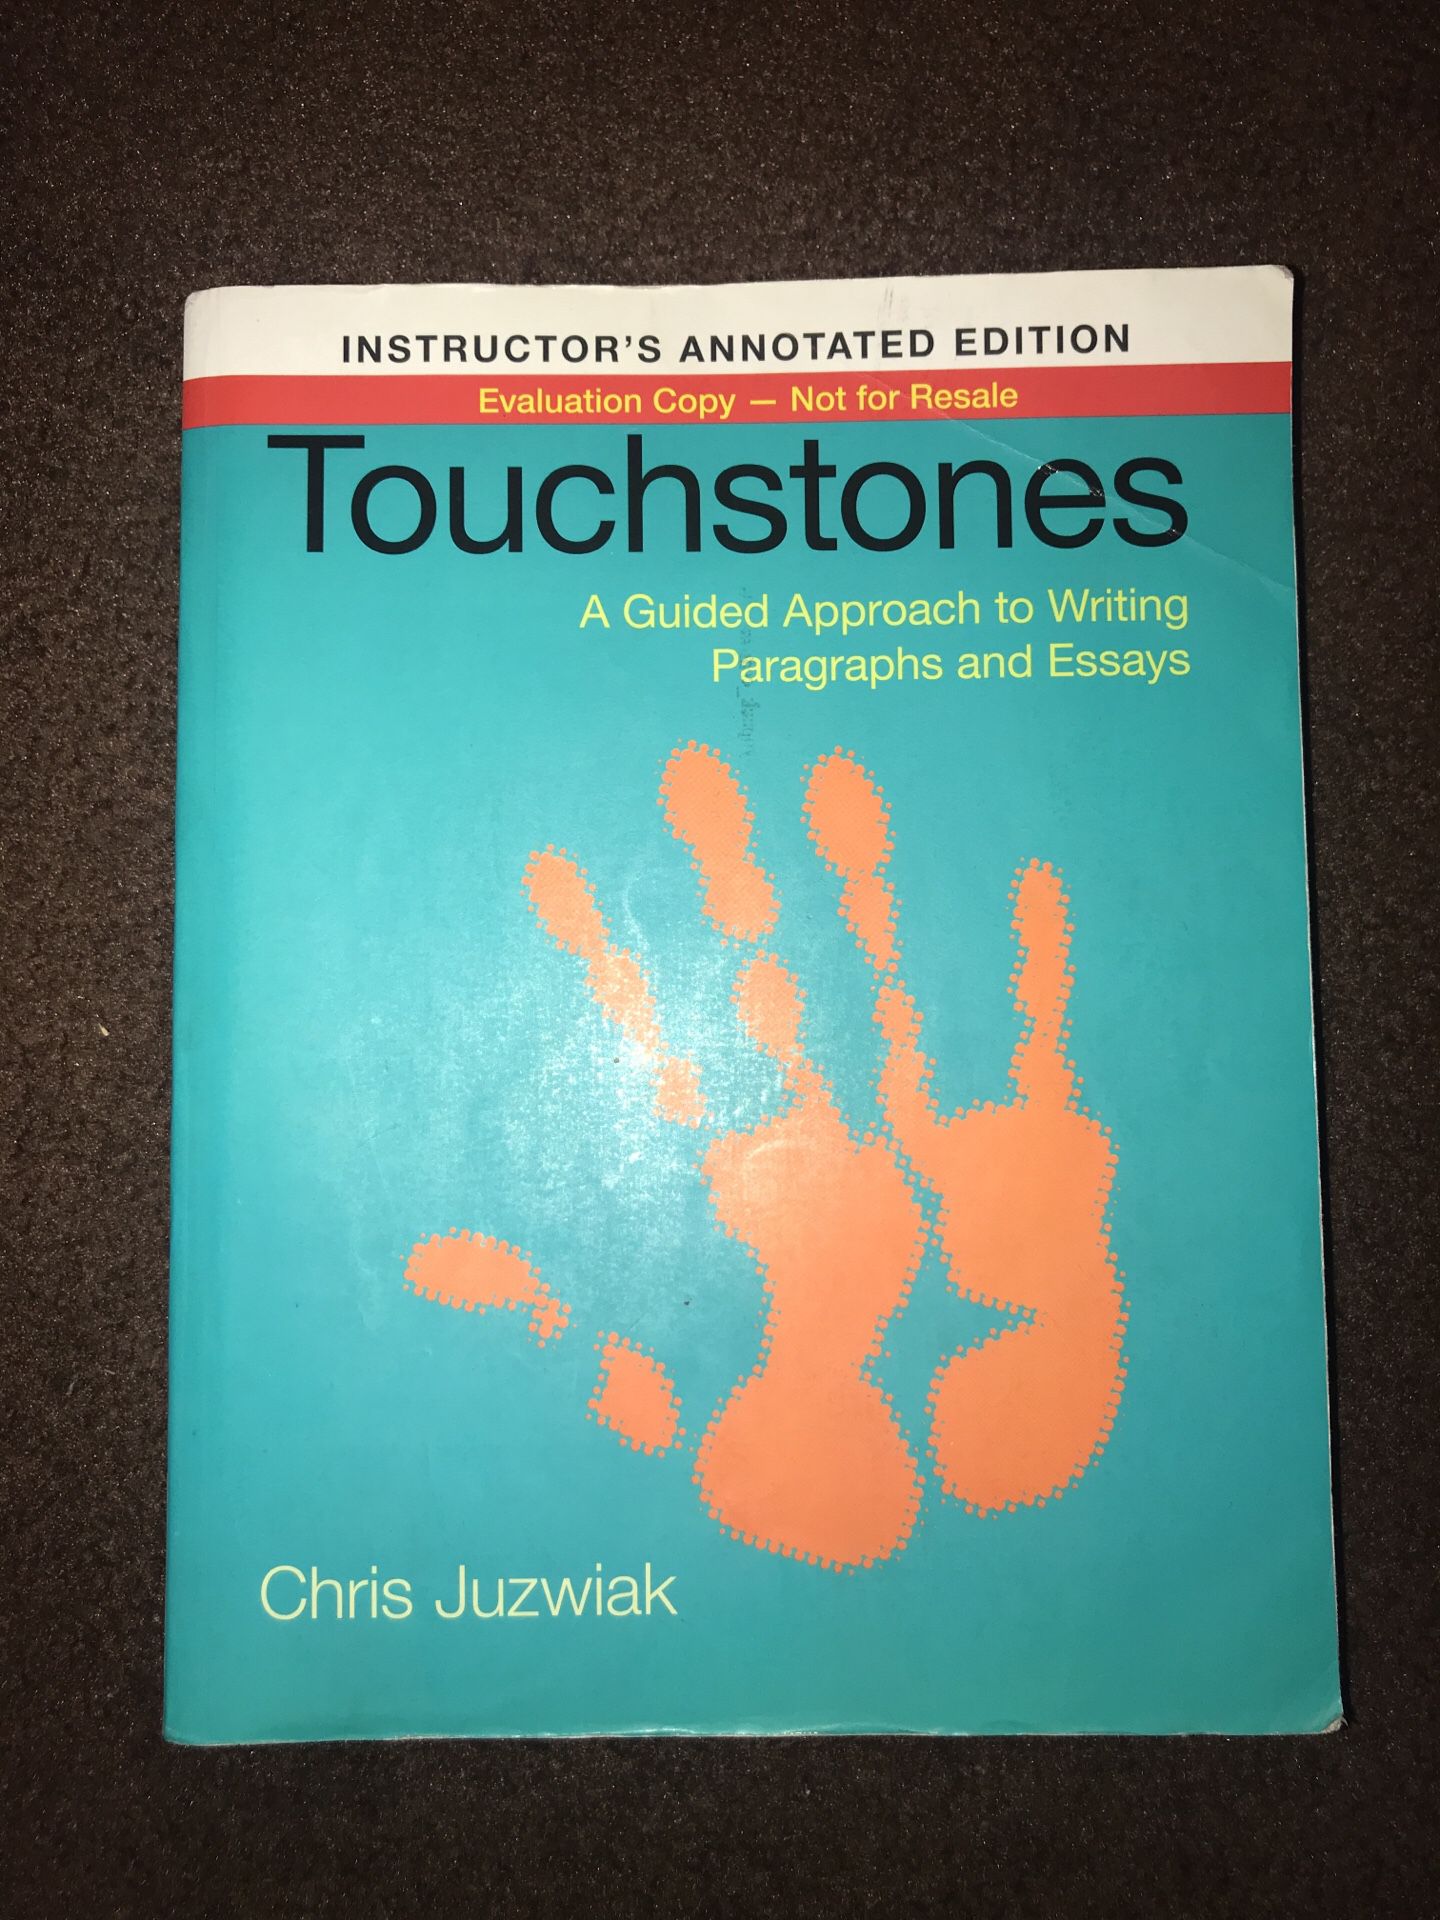 TOUCHSTONES (A guided approach to writing paragraphs and essays)